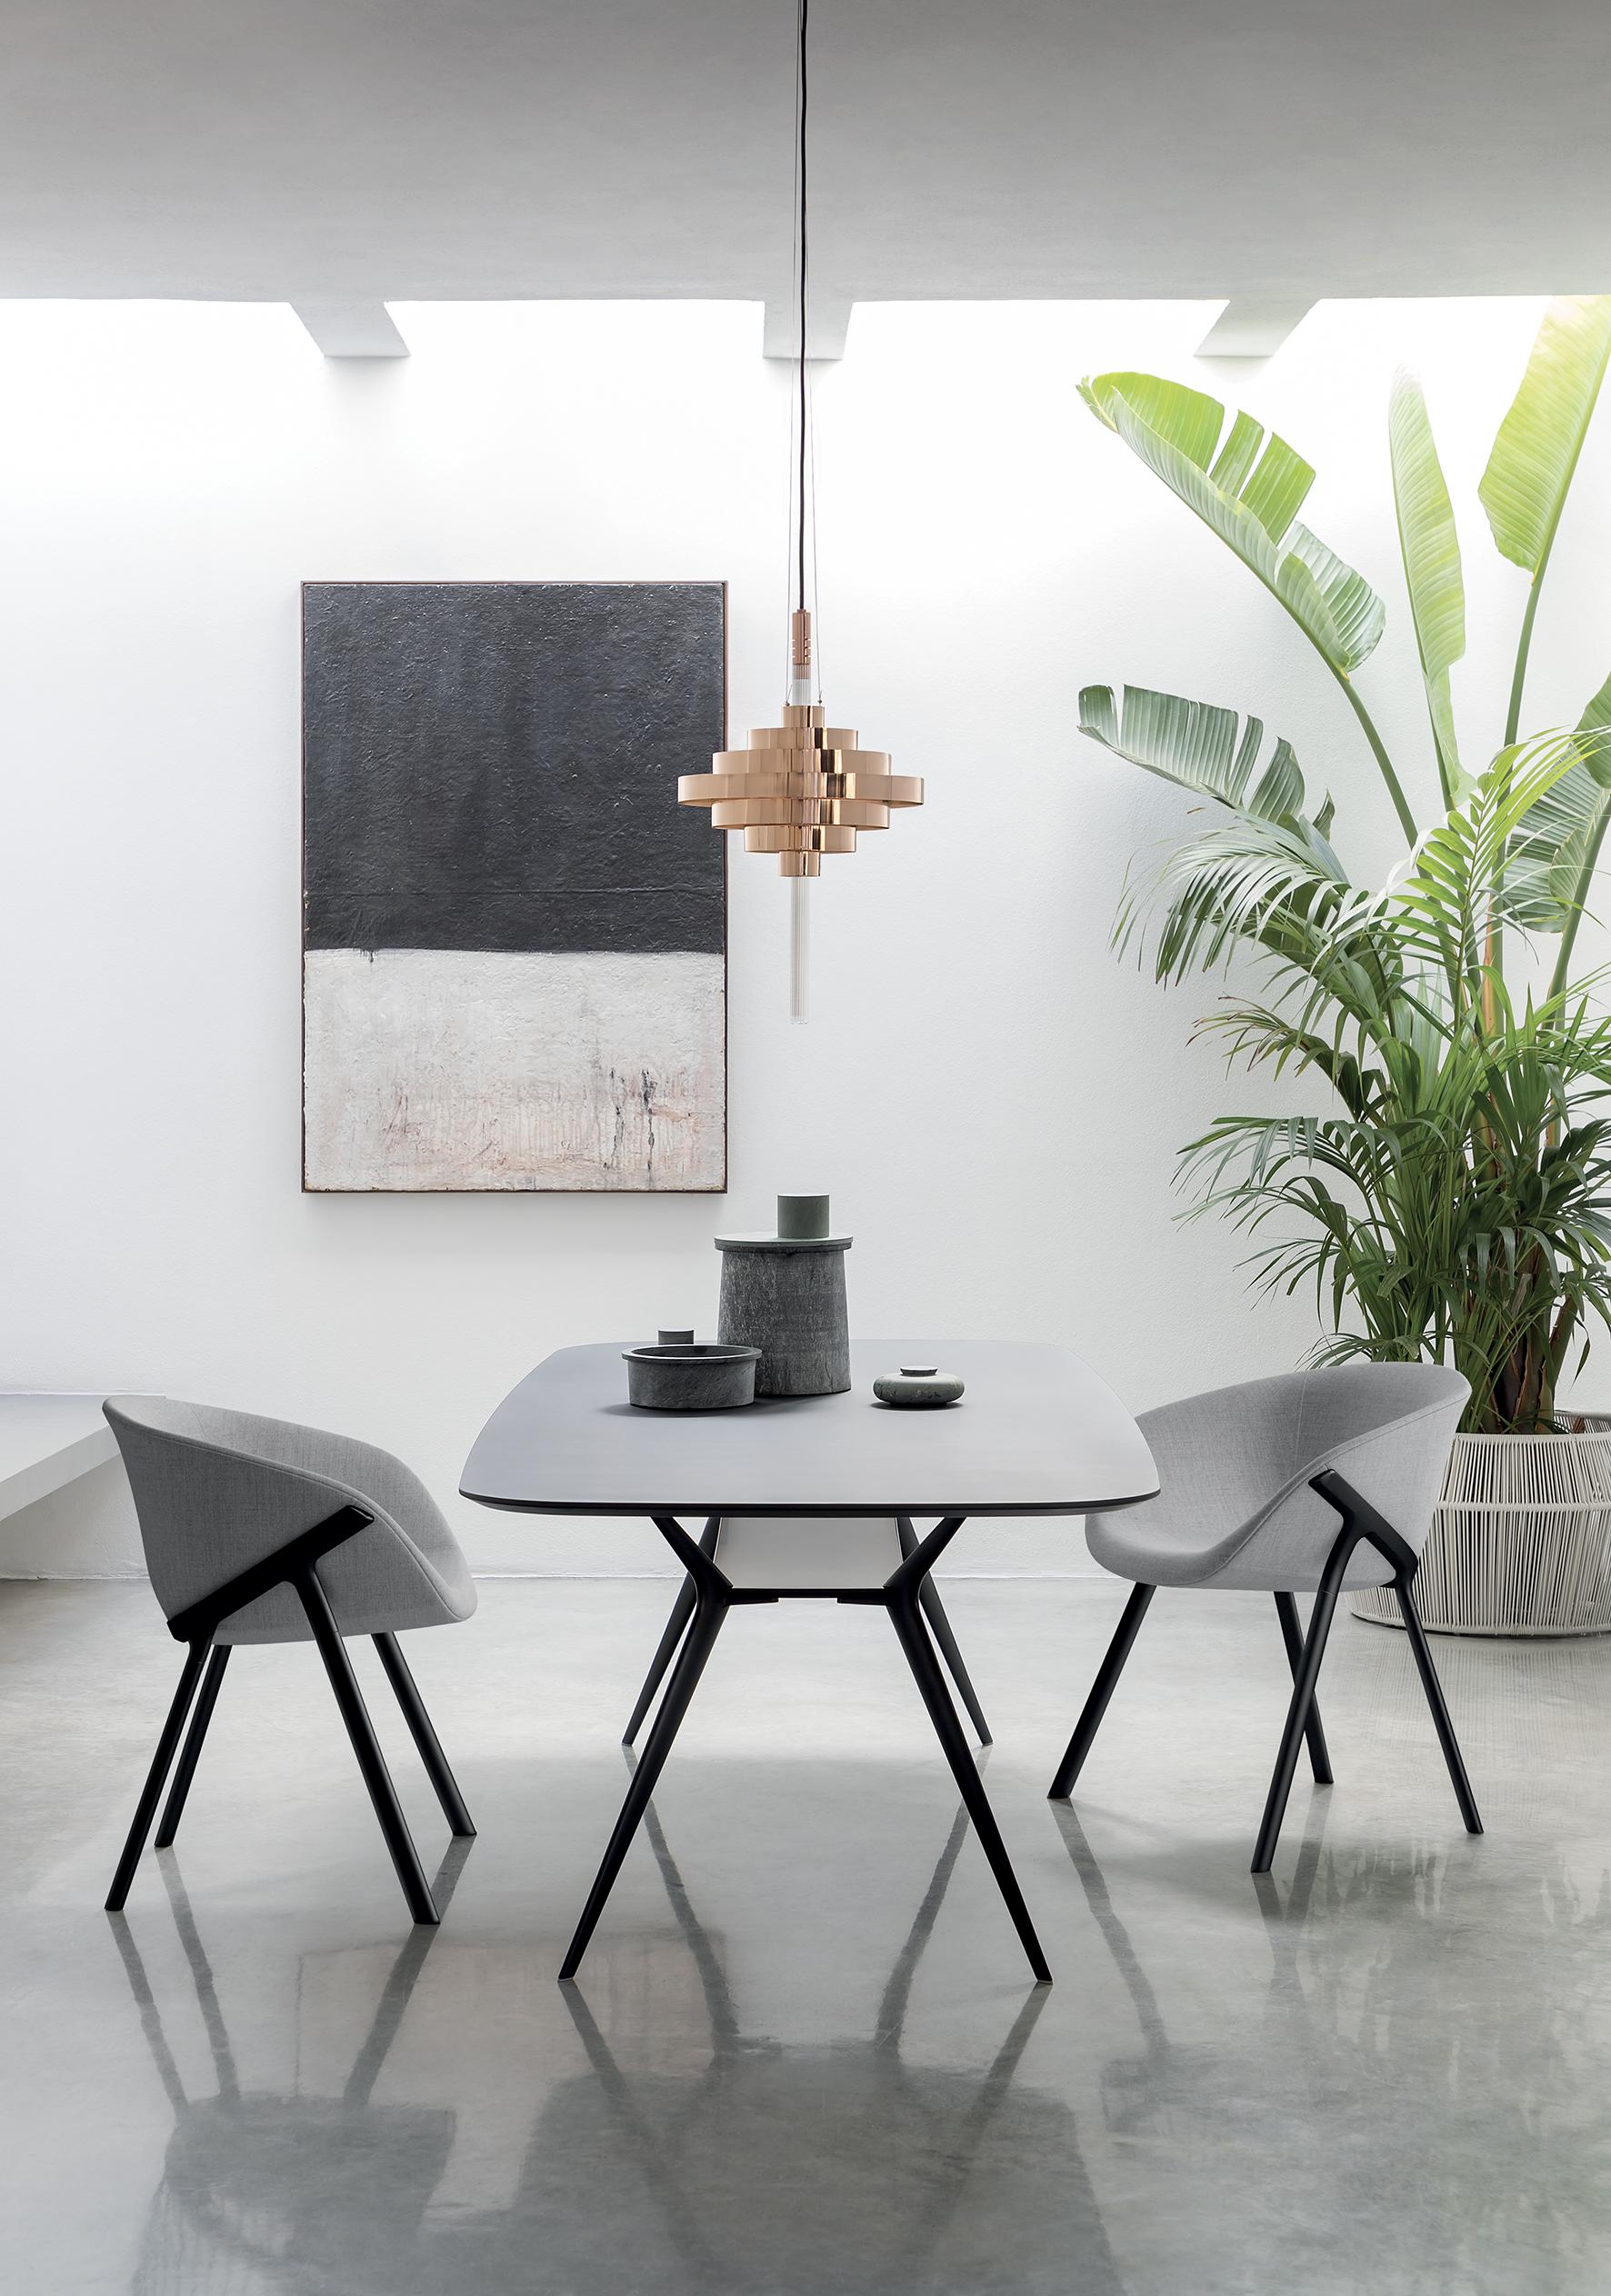 Alias Biplane 403 Table in Sand MDF Top with Sand Lacquered Aluminium Frame by Alberto Meda

Round table with structure composed of 4 legs in diecast aluminium with painted or polished finishes, connected by a shelf.
Top available in: - Lacquered